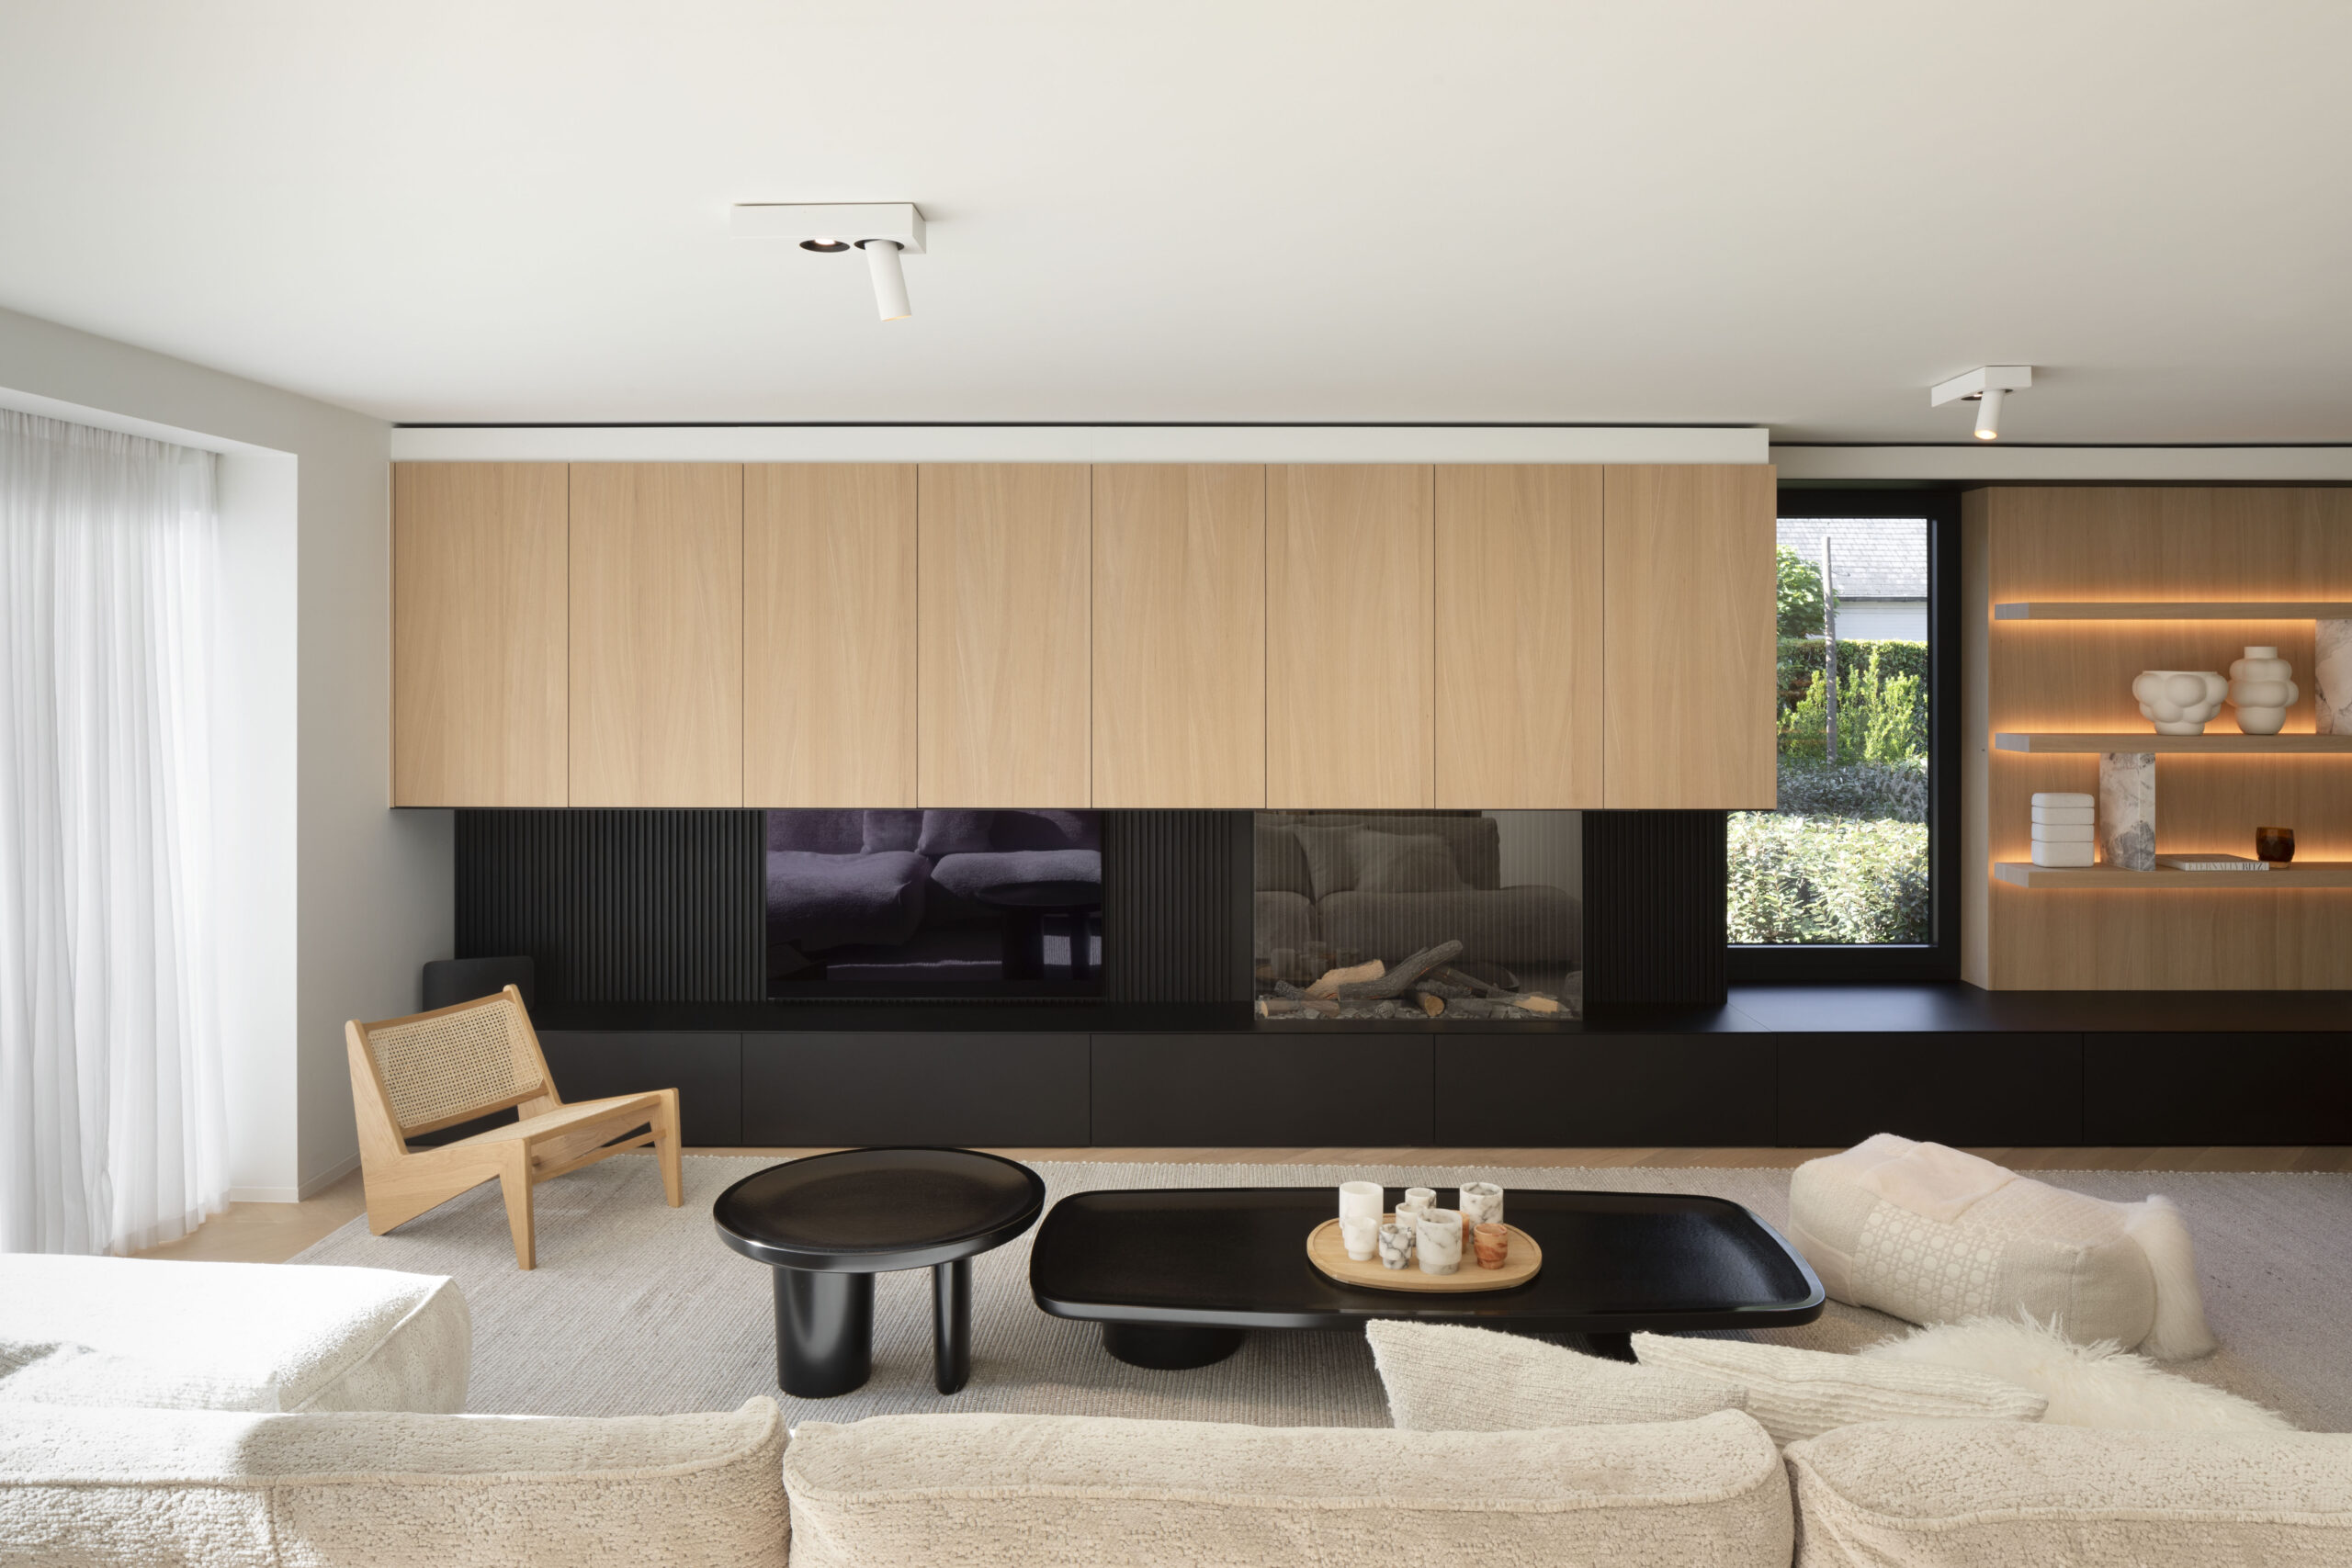 Modern living room with wooden accents, black tables, and lighted shelves.